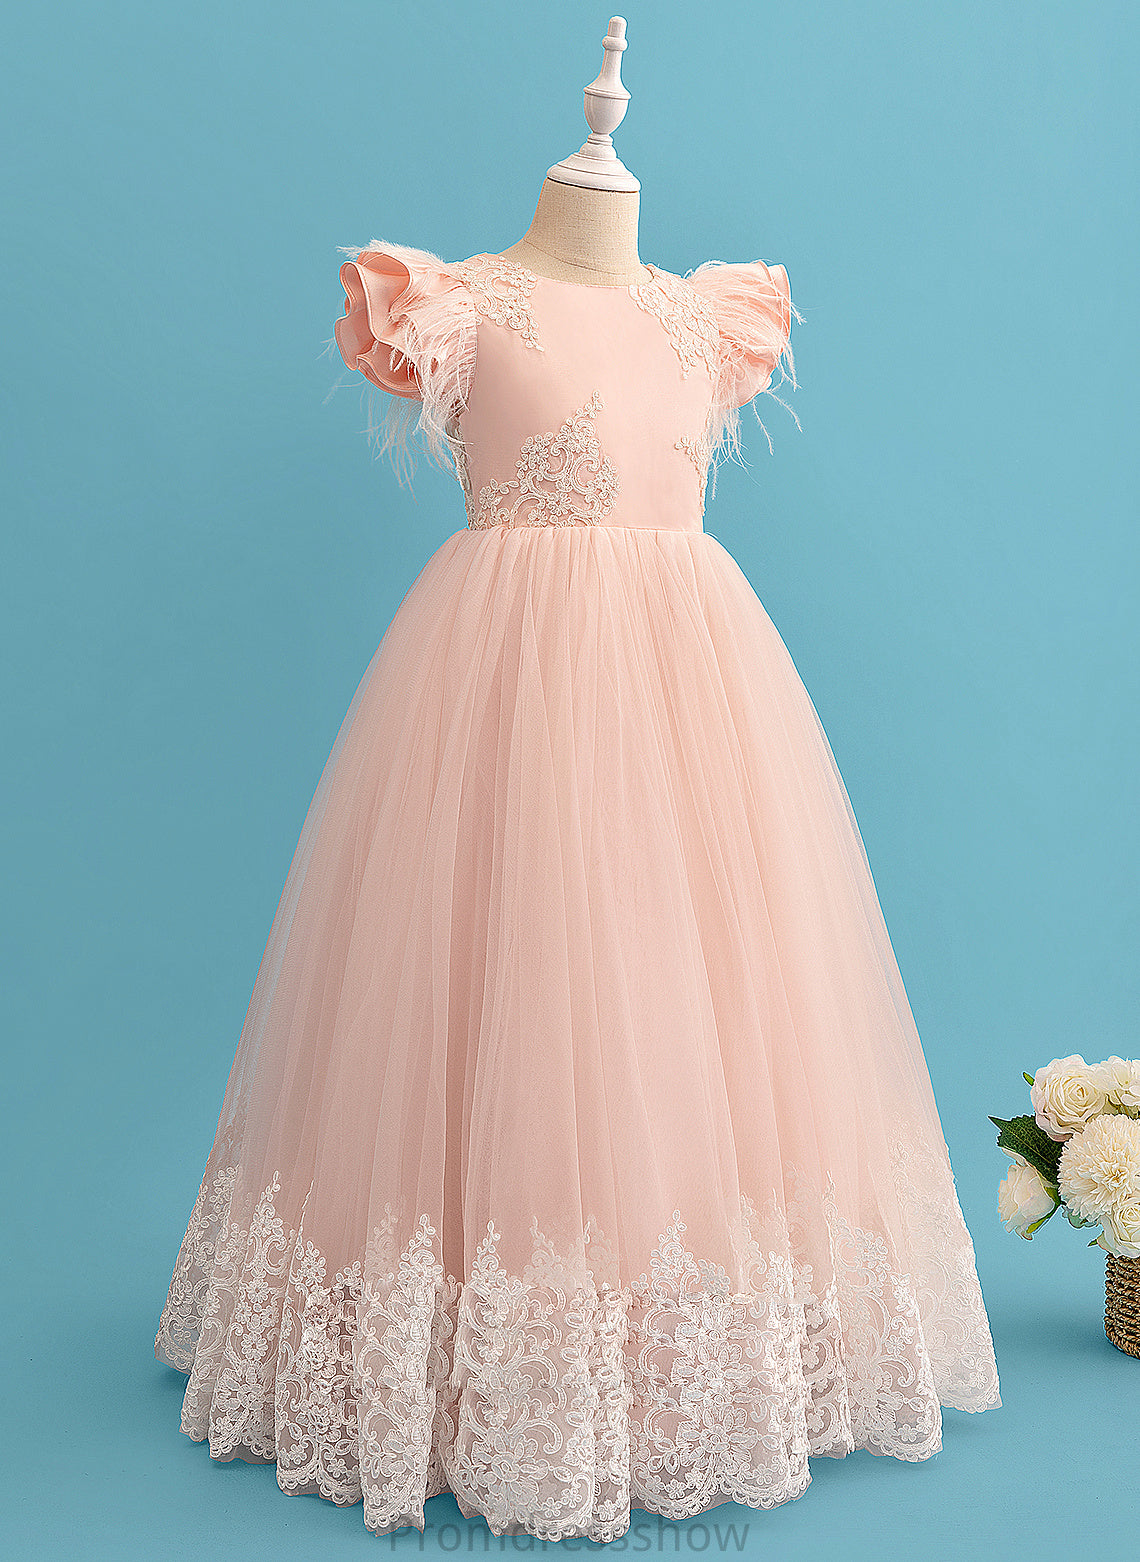 Ruffles/Feather/Bow(s) Girl Avah Sleeves Dress Flower Girl Dresses Floor-length Neck - Lace Ball-Gown/Princess With Flower Scoop Short